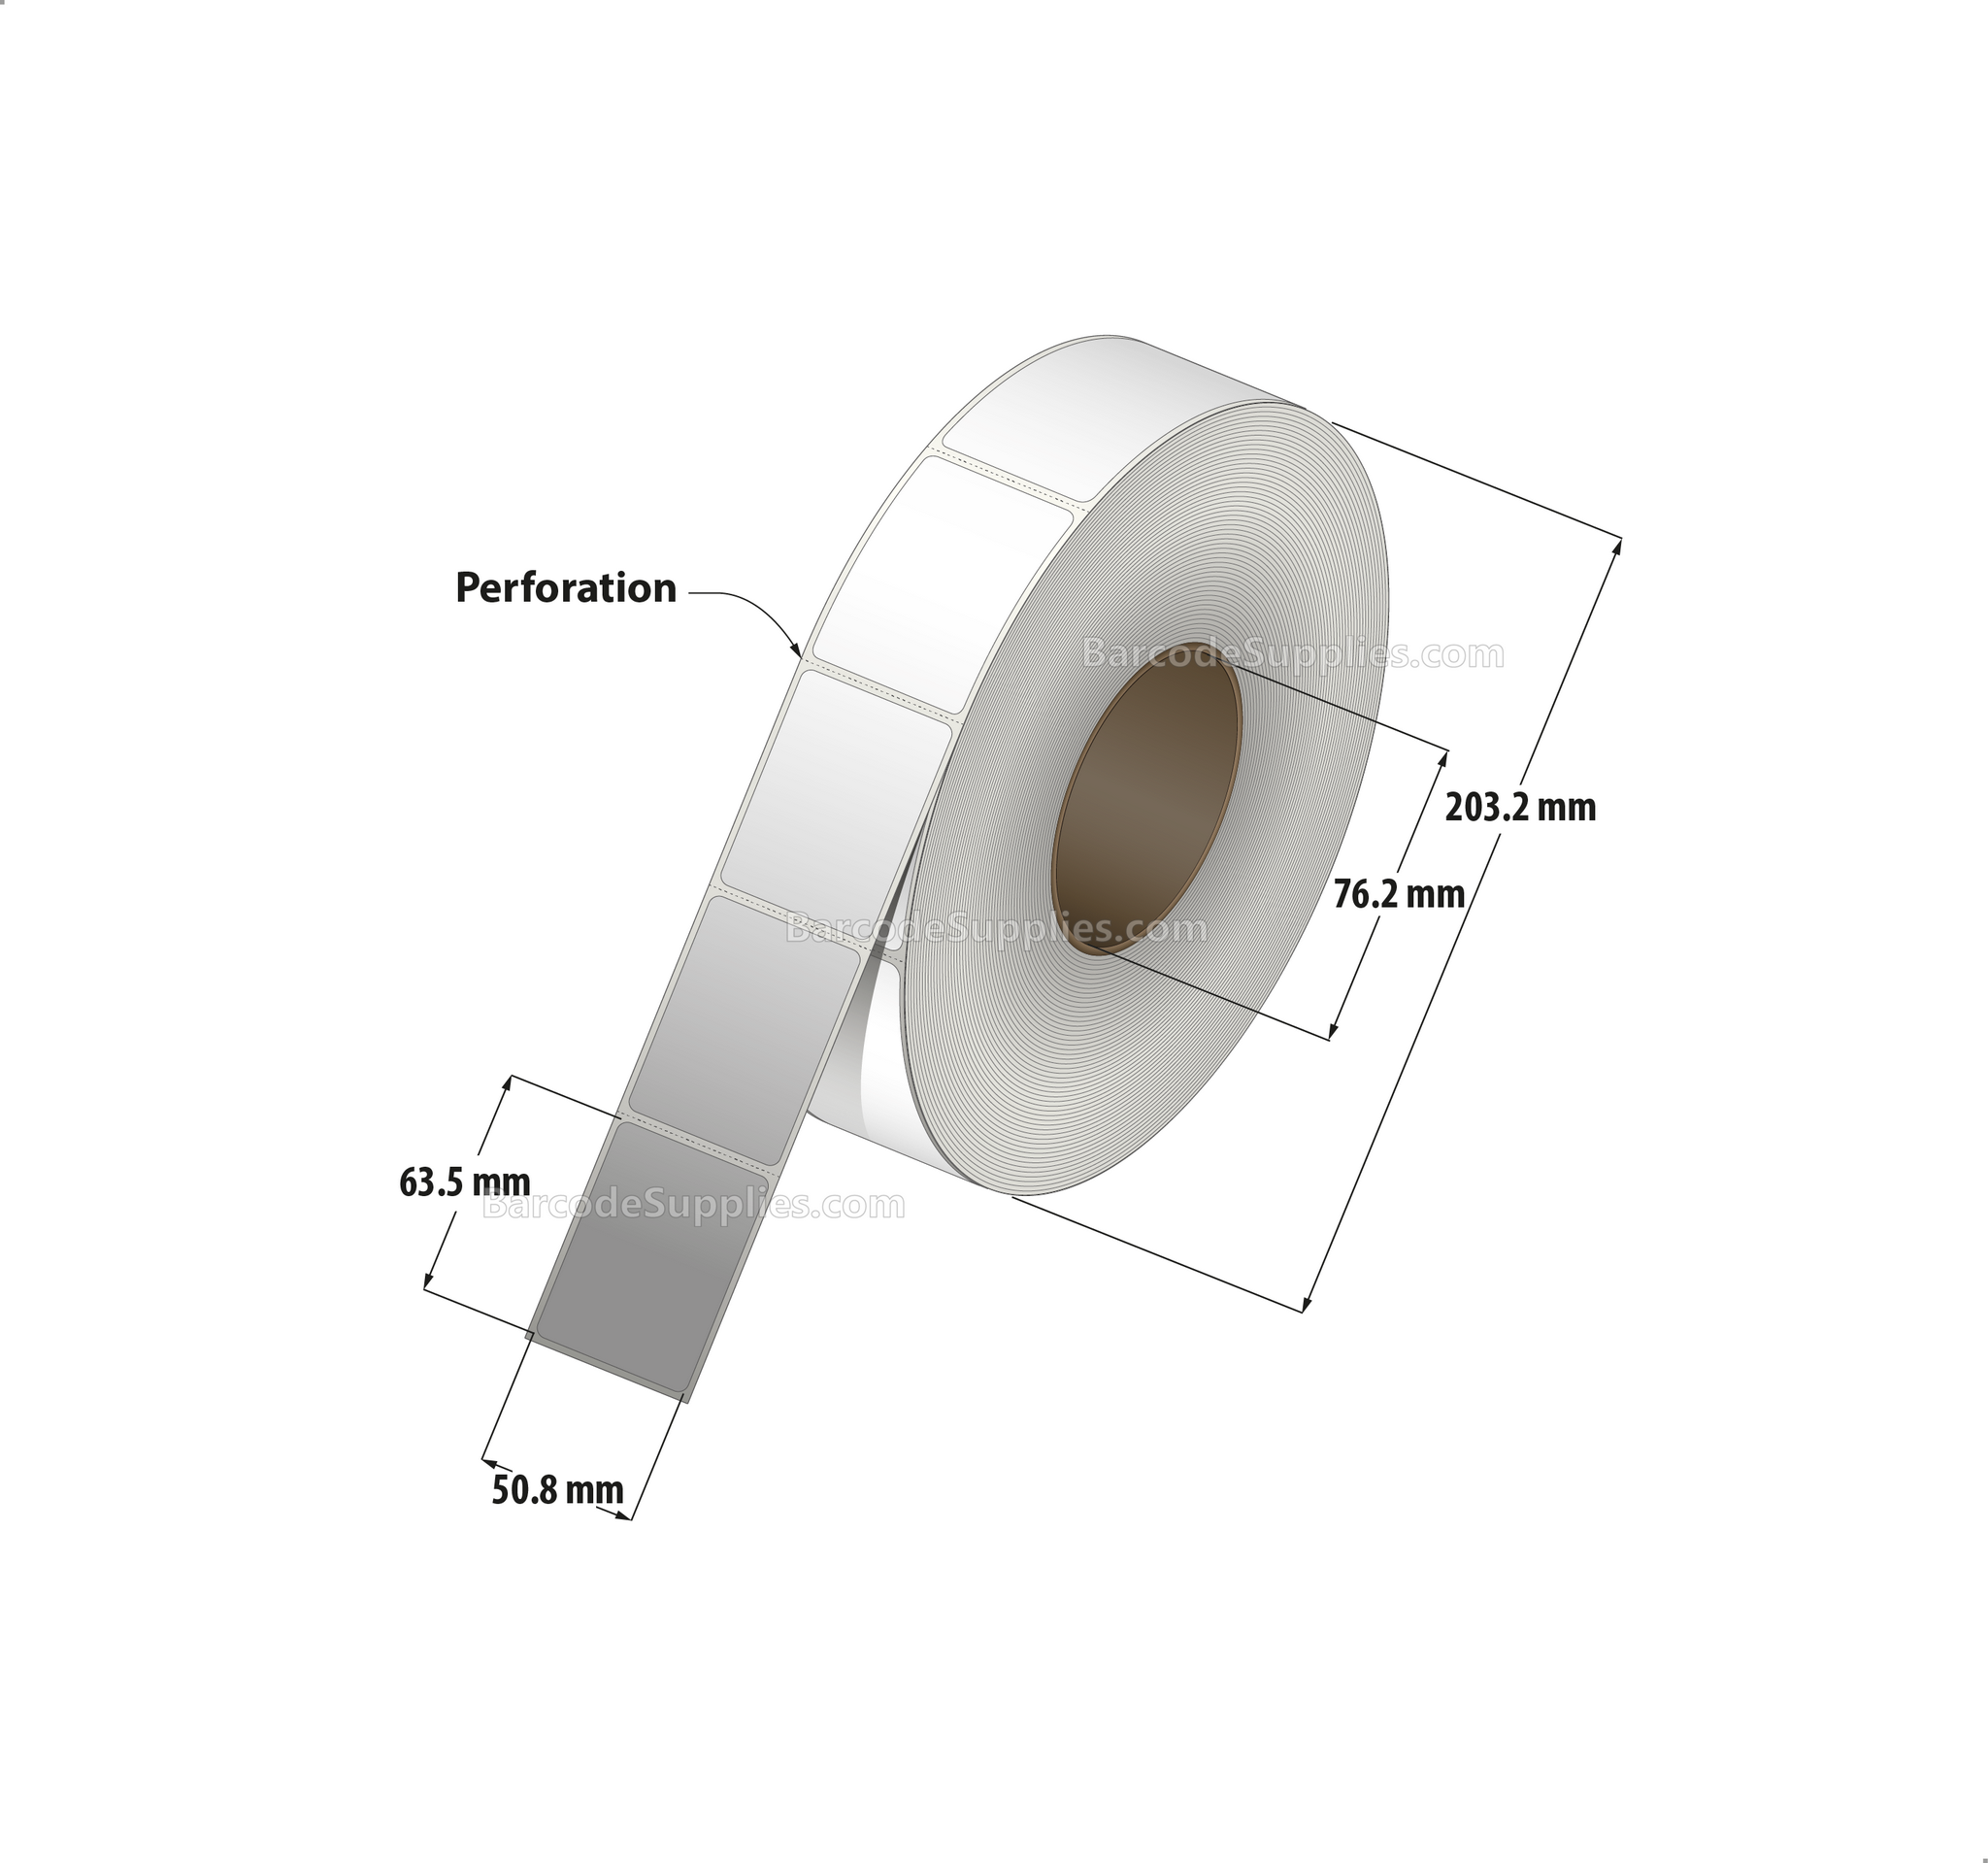 1.75 x 2.5 Thermal Transfer White Labels With Permanent Adhesive - Perforated - 2500 Labels Per Roll - Carton Of 8 Rolls - 20000 Labels Total - MPN: RT-175-25-2500-3